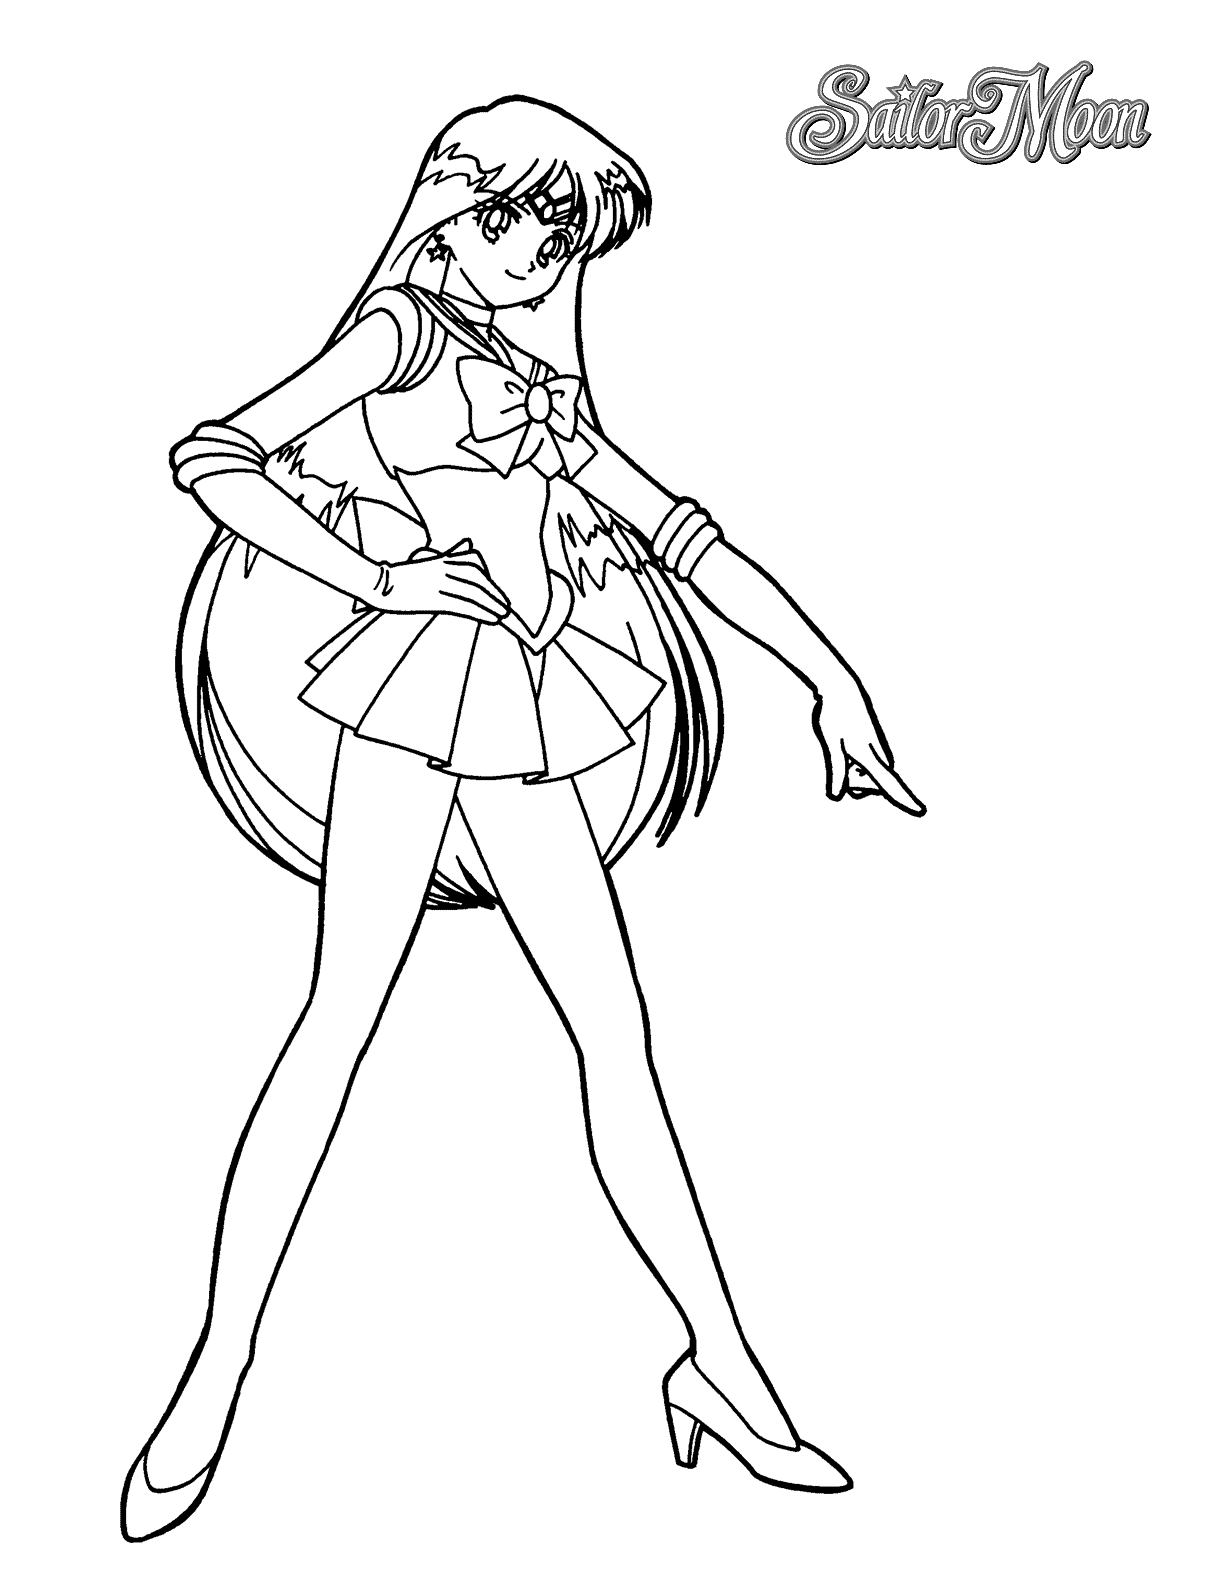 Sailor Mars Coloring Pages